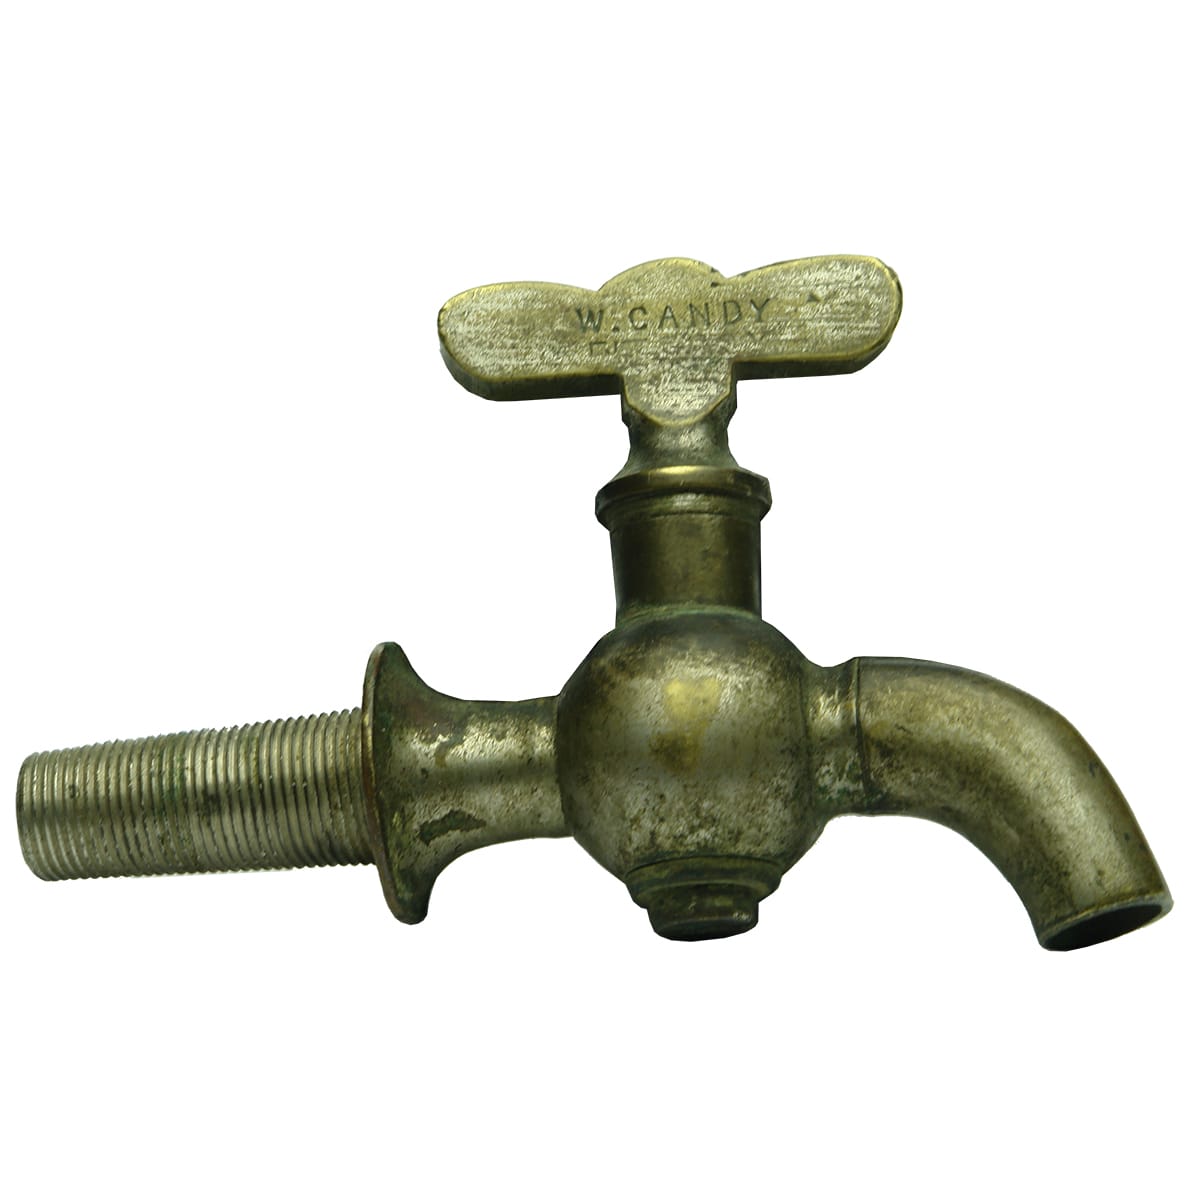 Metalware.  W. Candy, Fitzroy Water Filter Tap. (Victoria)